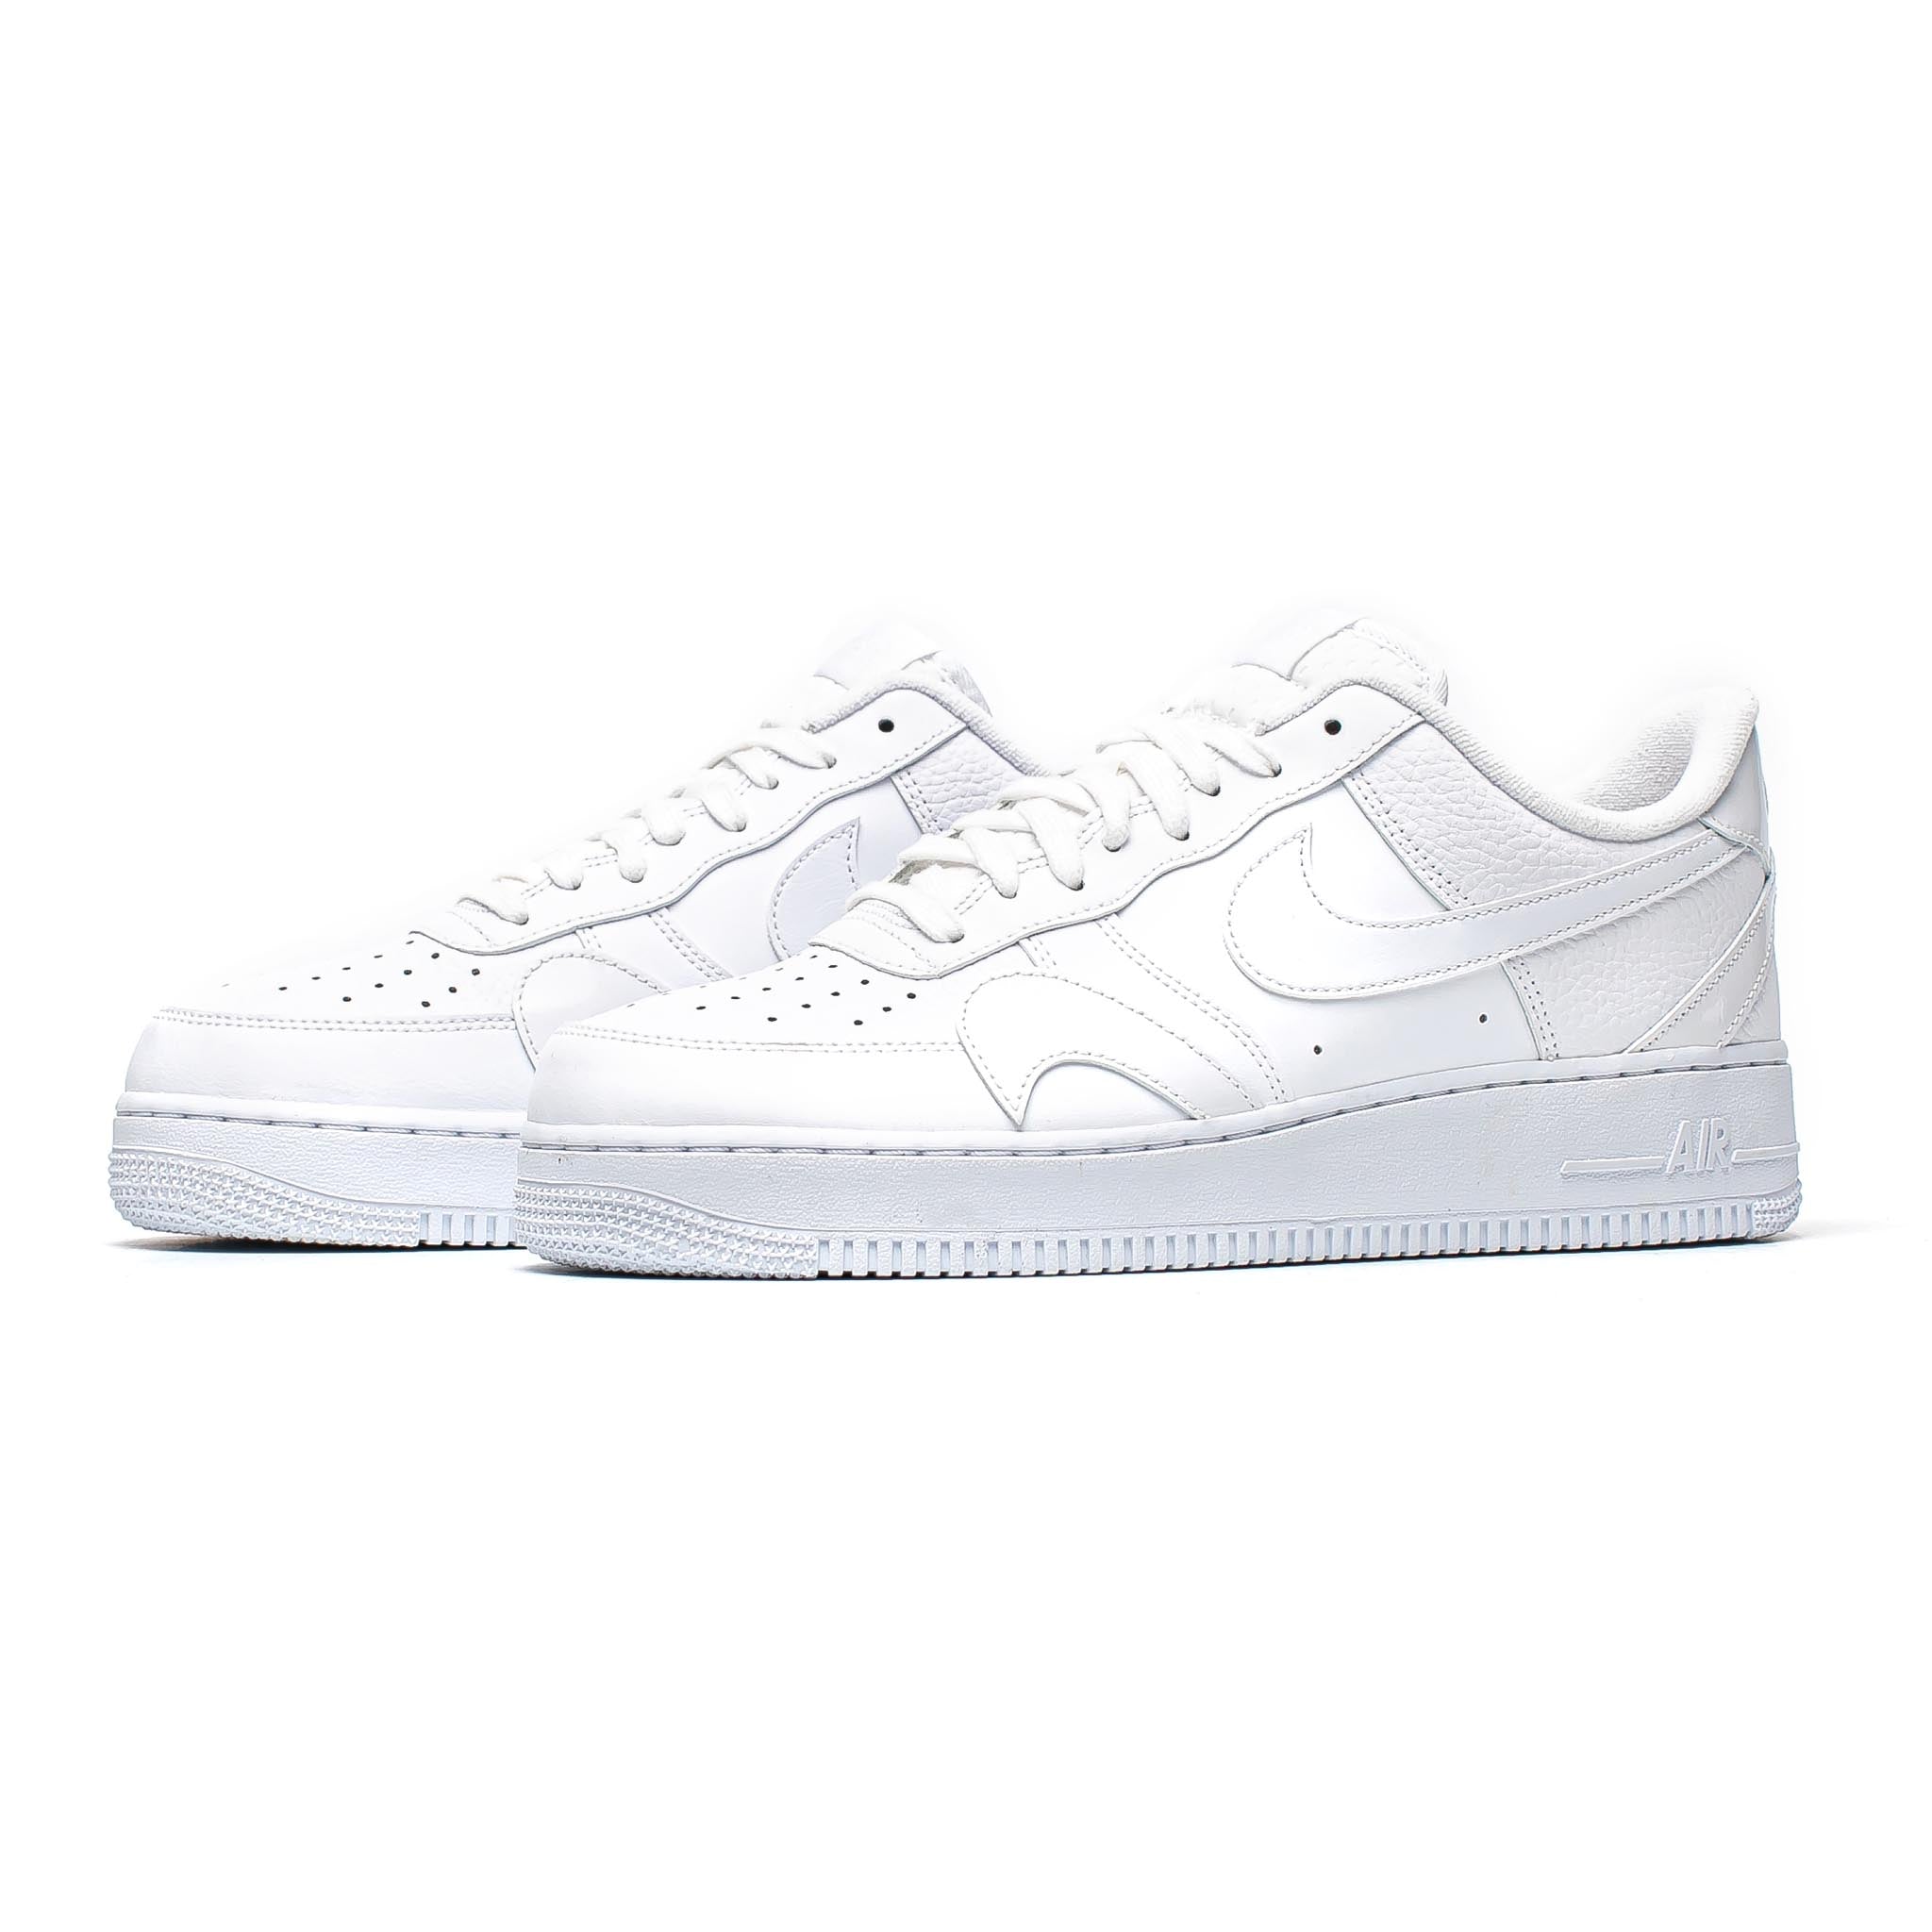 Nike Air Force 1 '07 LV8 2 'Misplaced Swooshes' White